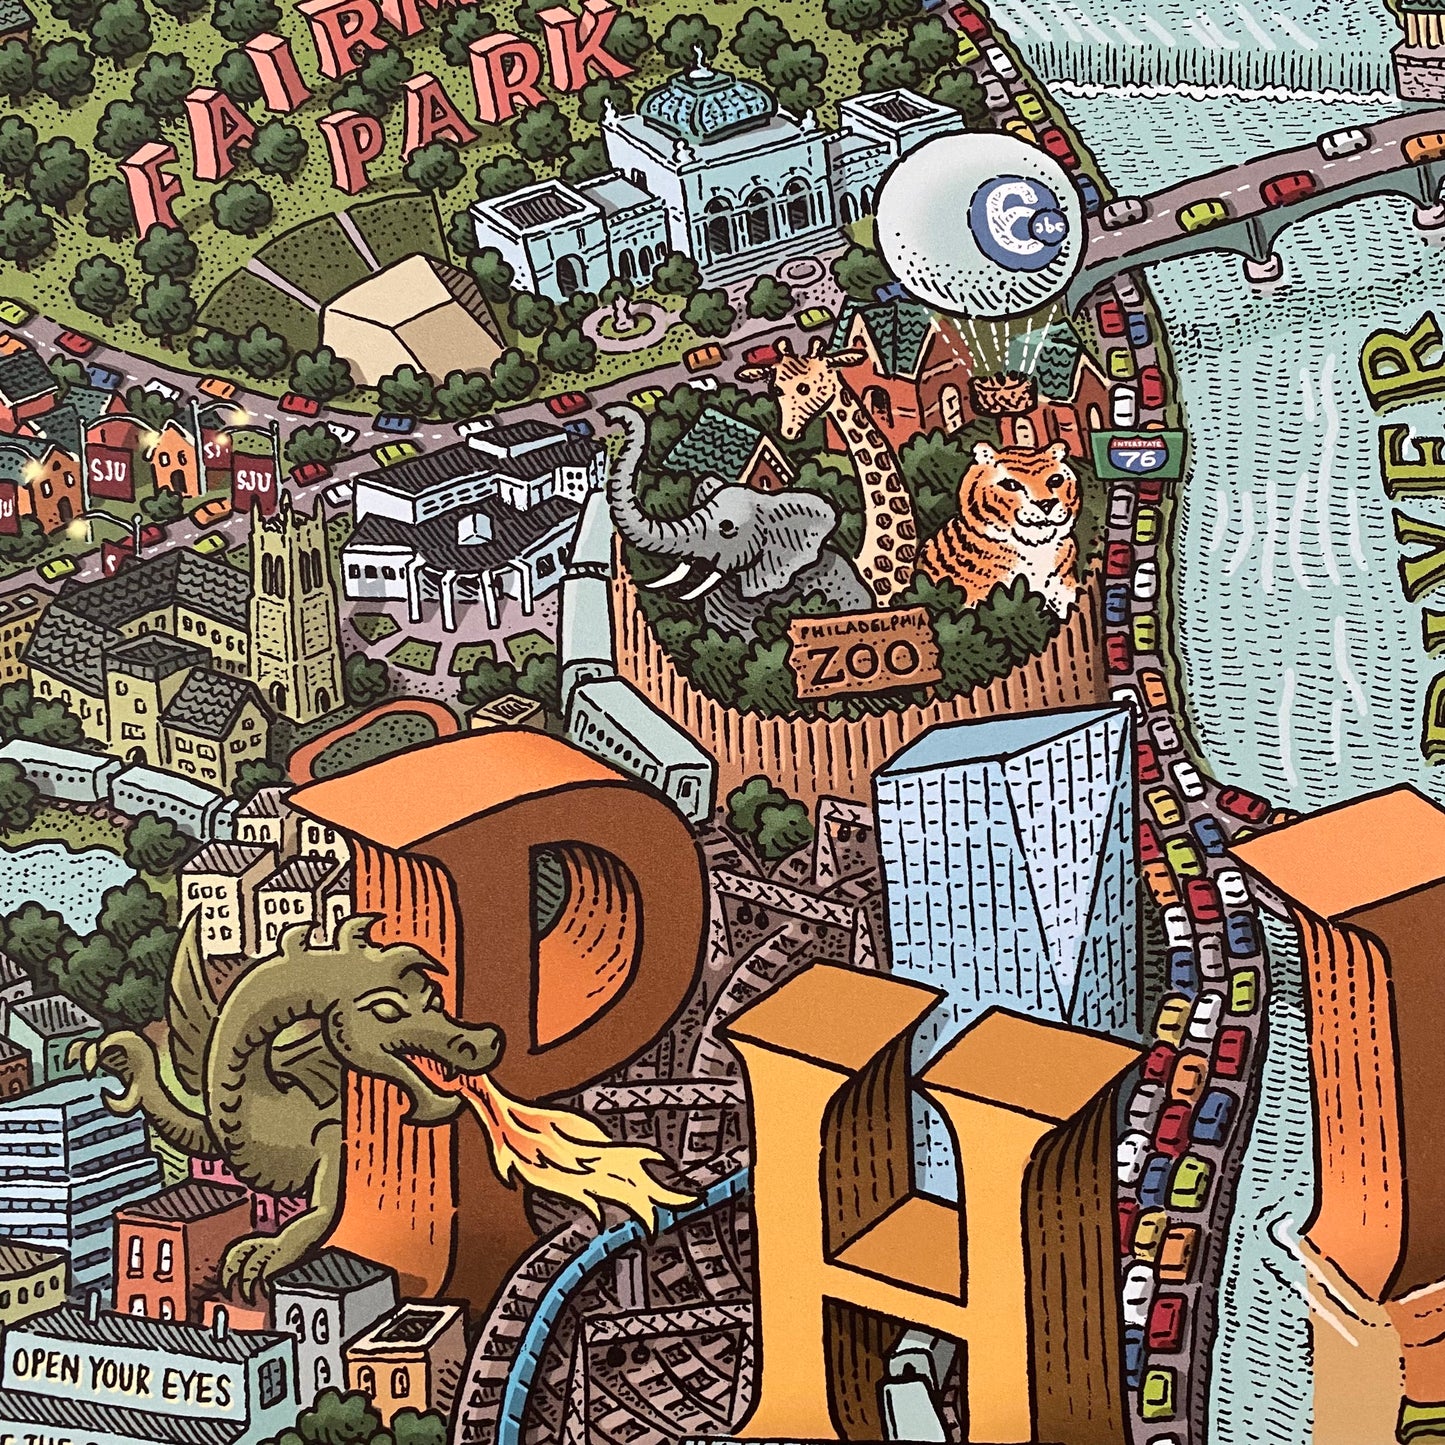 Illustrated Mario Zucca Philadelphia Landmarks Map with colorful, whimsical depiction of a zoo and surrounding urban landscape highlighting Philly landmarks.